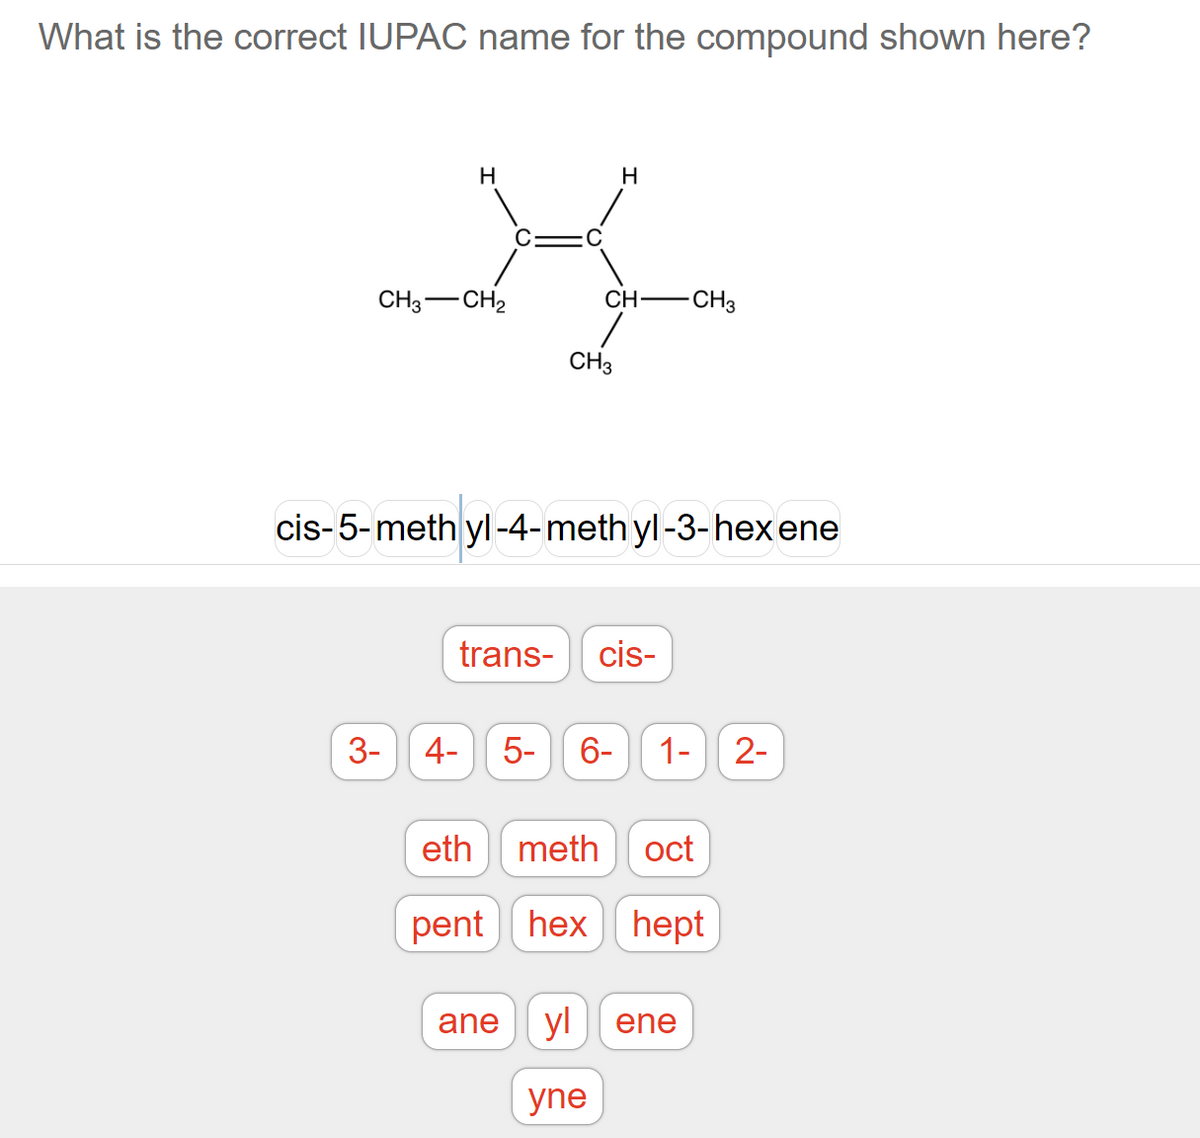 What is the correct IUPAC name for the compound shown here?
H
H
-
CH3 CH2
CH
-CH3
CH3
cis-5-methyl-4-methyl-3-hexene
trans- cis-
3- 4-
5- 6- 1- 2-
eth
meth oct
pent hex hept
ane
yl
ene
yne